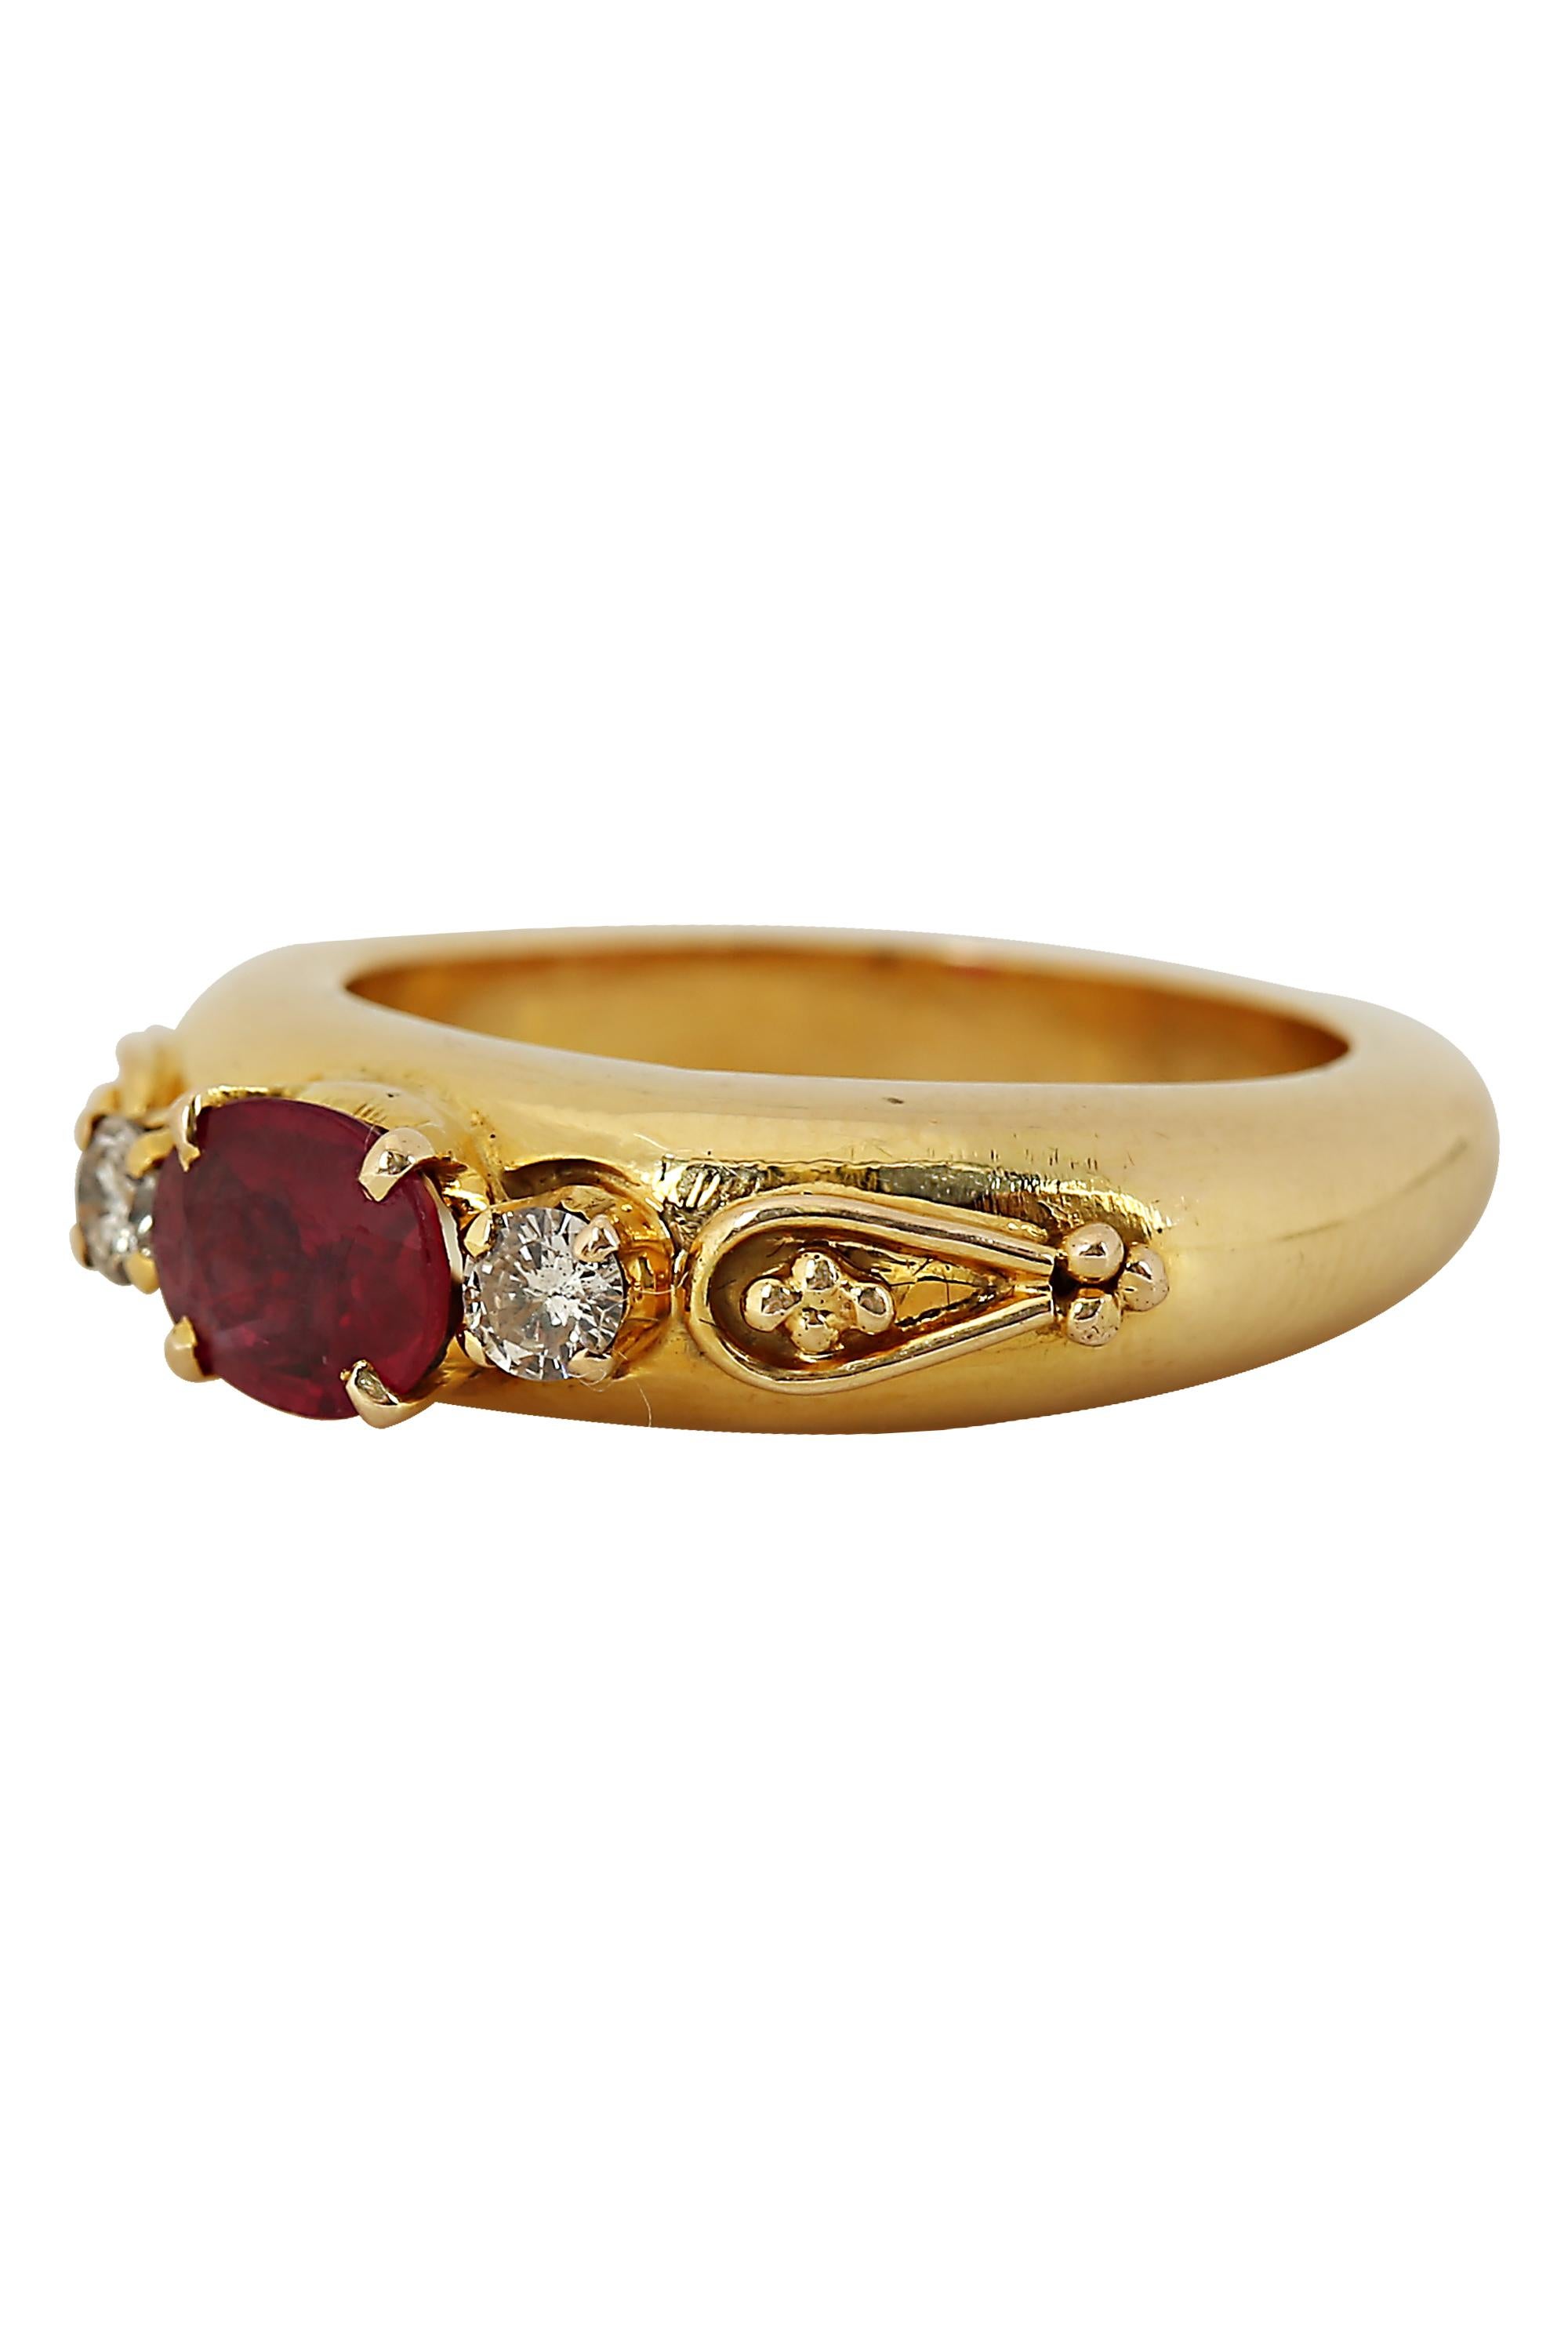 A bold ruby and diamond ring featuring a rich red oval ruby of approximately .65 carats illuminated by two round brilliant diamonds in a modern 18 karat yellow gold tubular setting highlighted by beadwork designs at the shoulders. Diamond weight is